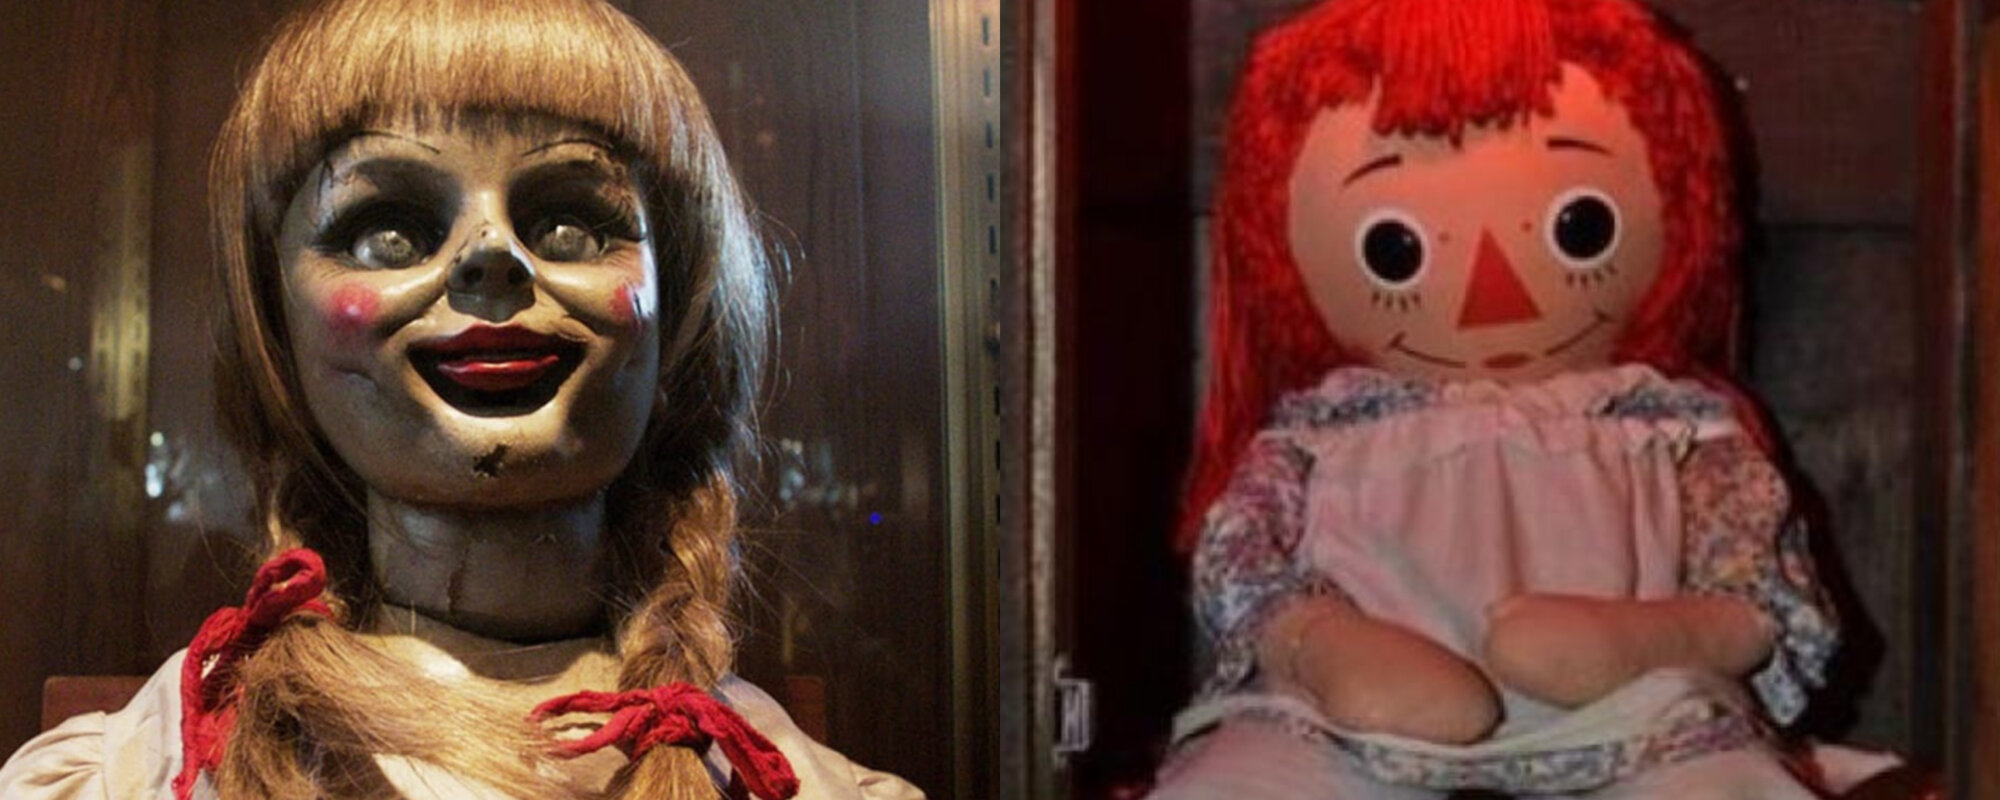 annabelle doll to buy